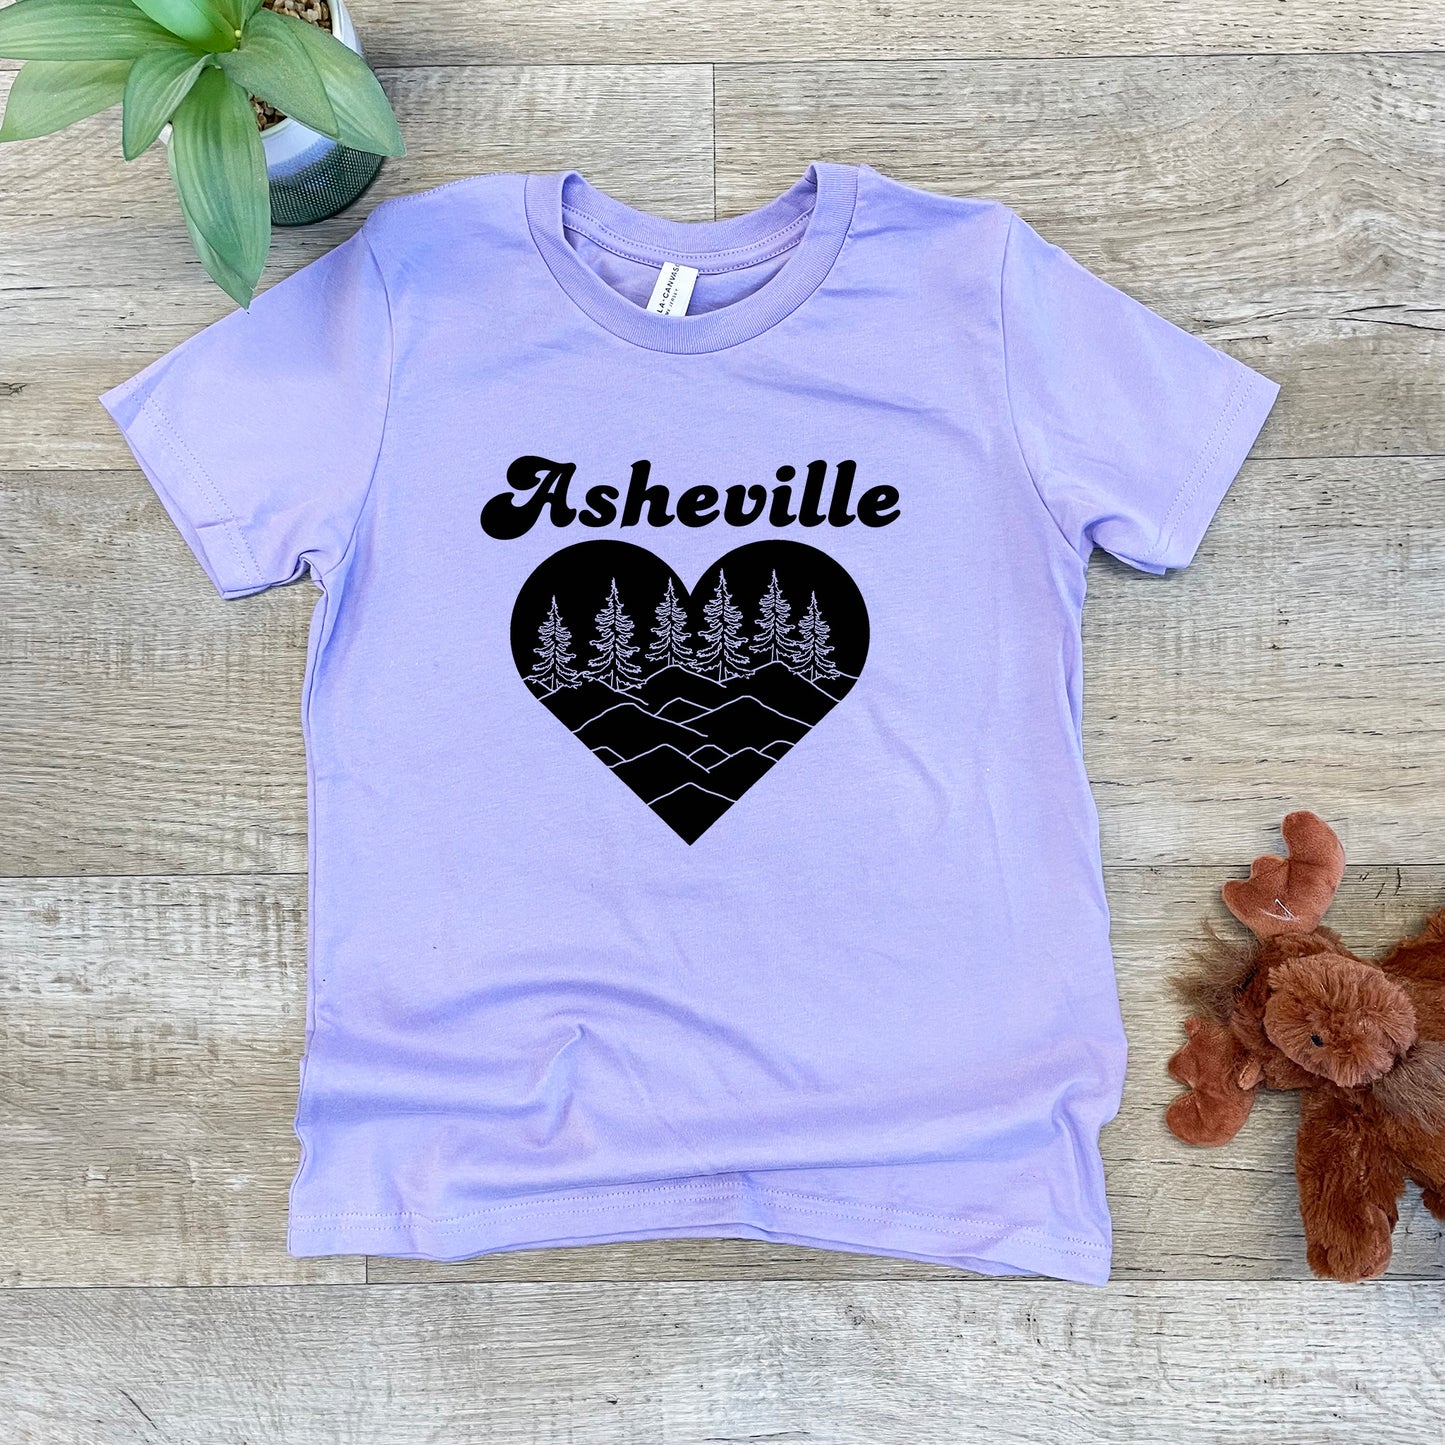 Asheville Heart - Kid's Tee - Columbia Blue or Lavender